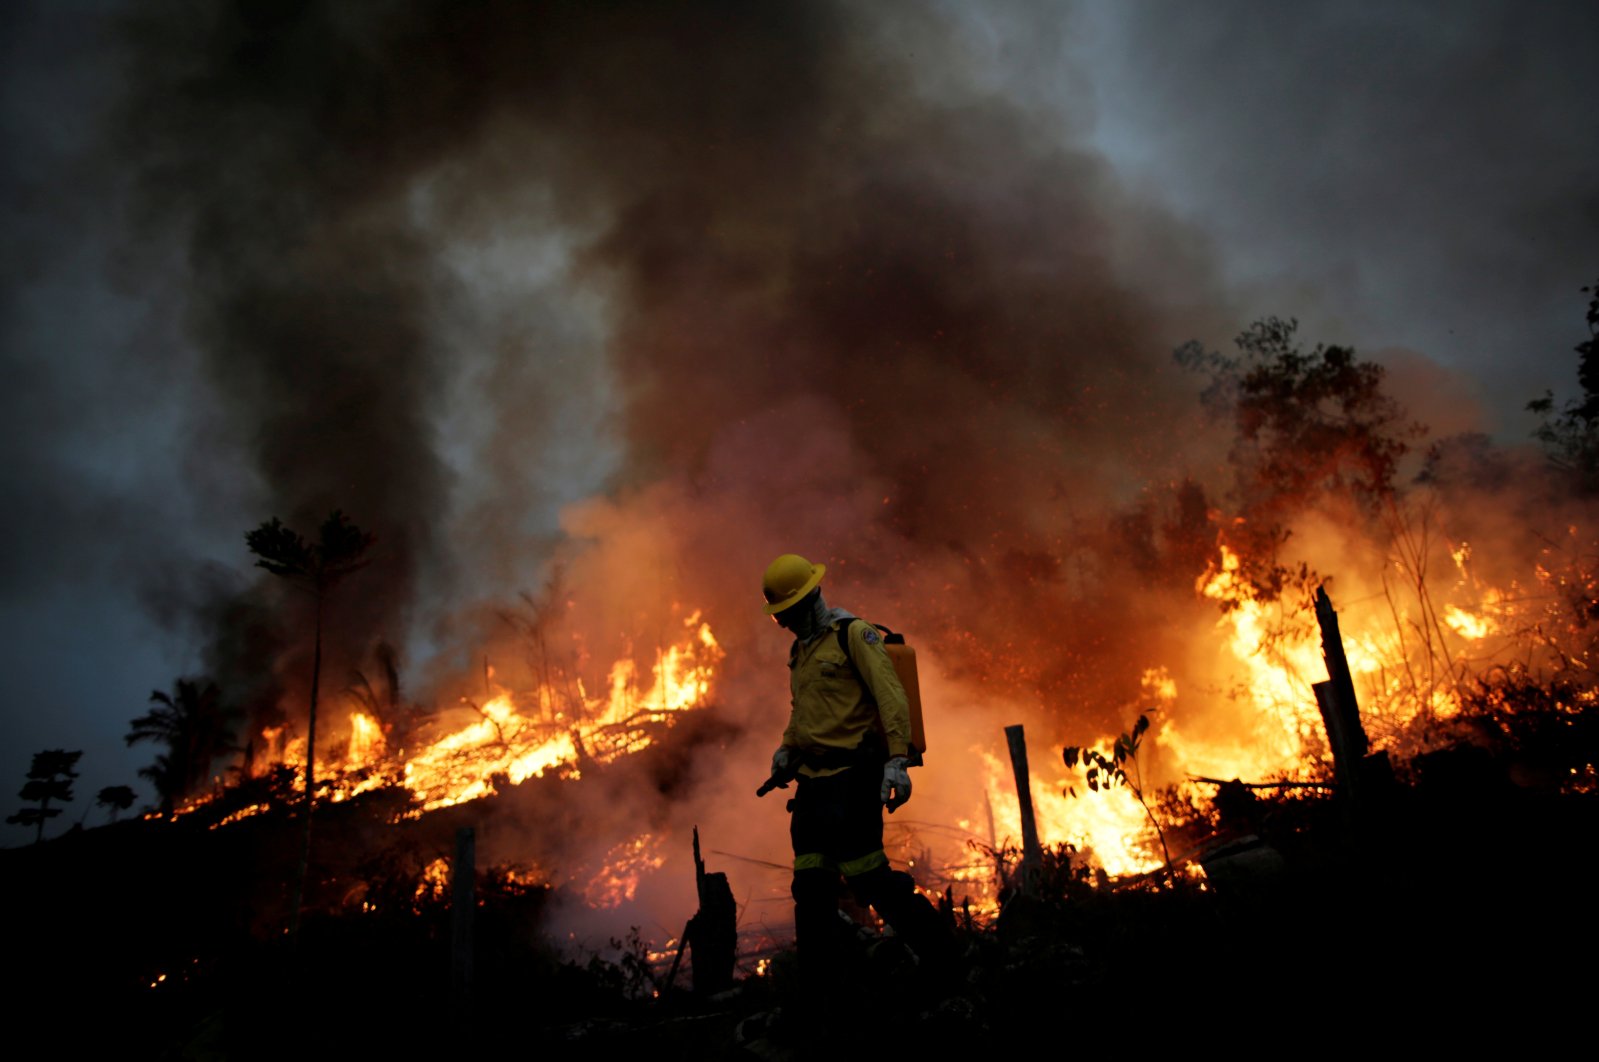 A Brazilian Institute for the Environment and Renewable Natural Resources (IBAMA) fire brigade member attempts to control a fire in a tract of the Amazon jungle in Apui, Amazonas State, Brazil, Aug. 11, 2020. (Reuters Photo)